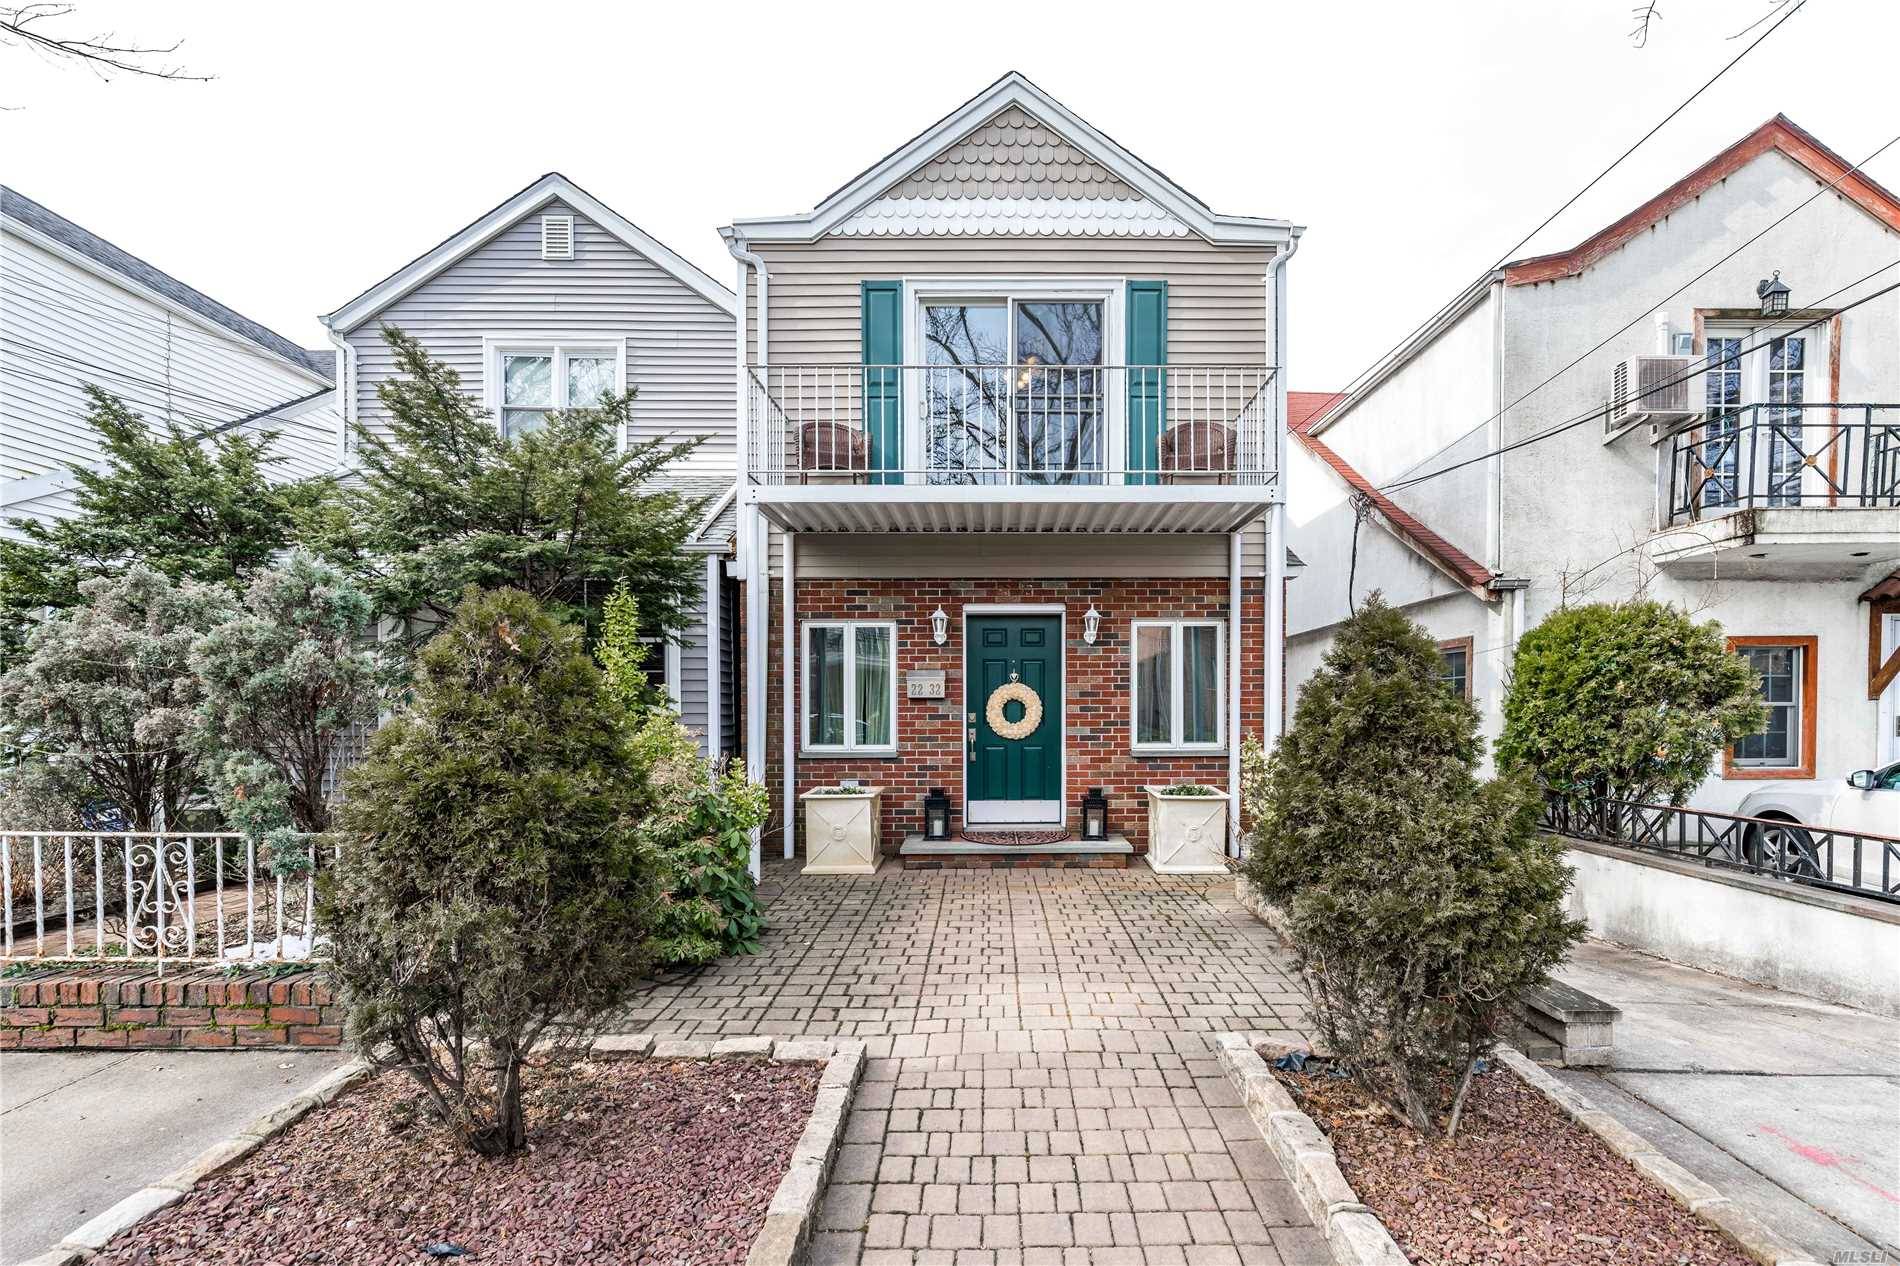 Move Right Into This Recently Renovated Detached Home Featuring Hardwood Floors Throughout, Large Master Br, New Stainless Steel Appliances, New Washer Dryer And Many Designer Touches Throughout !